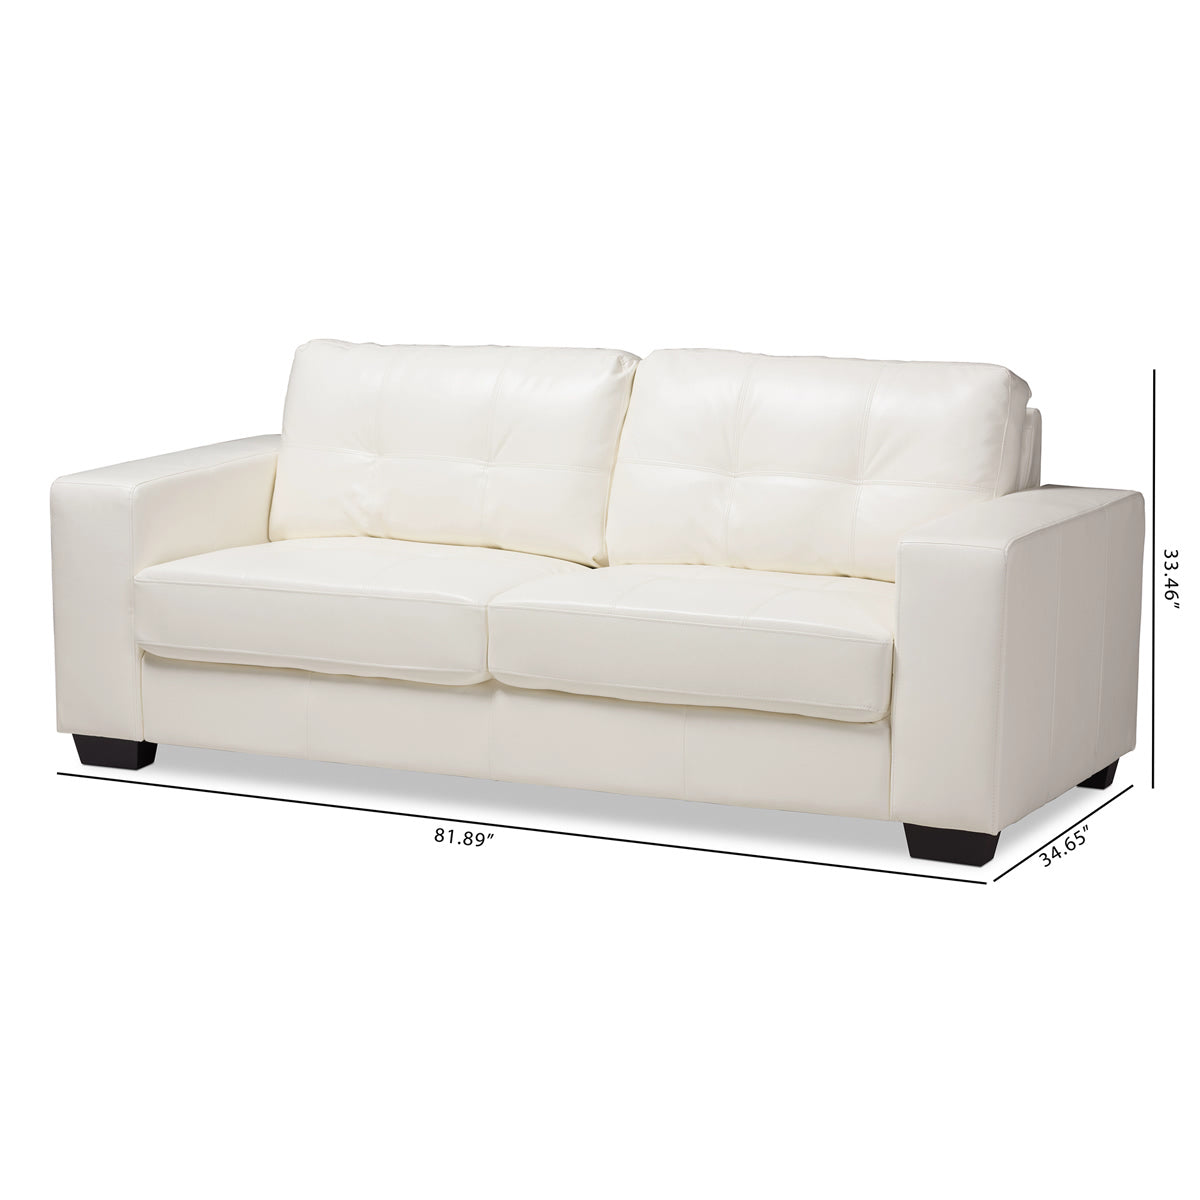 Baxton Studio Adalynn Modern and Contemporary White Faux Leather Upholstered Sofa Baxton Studio-sofas-Minimal And Modern - 9